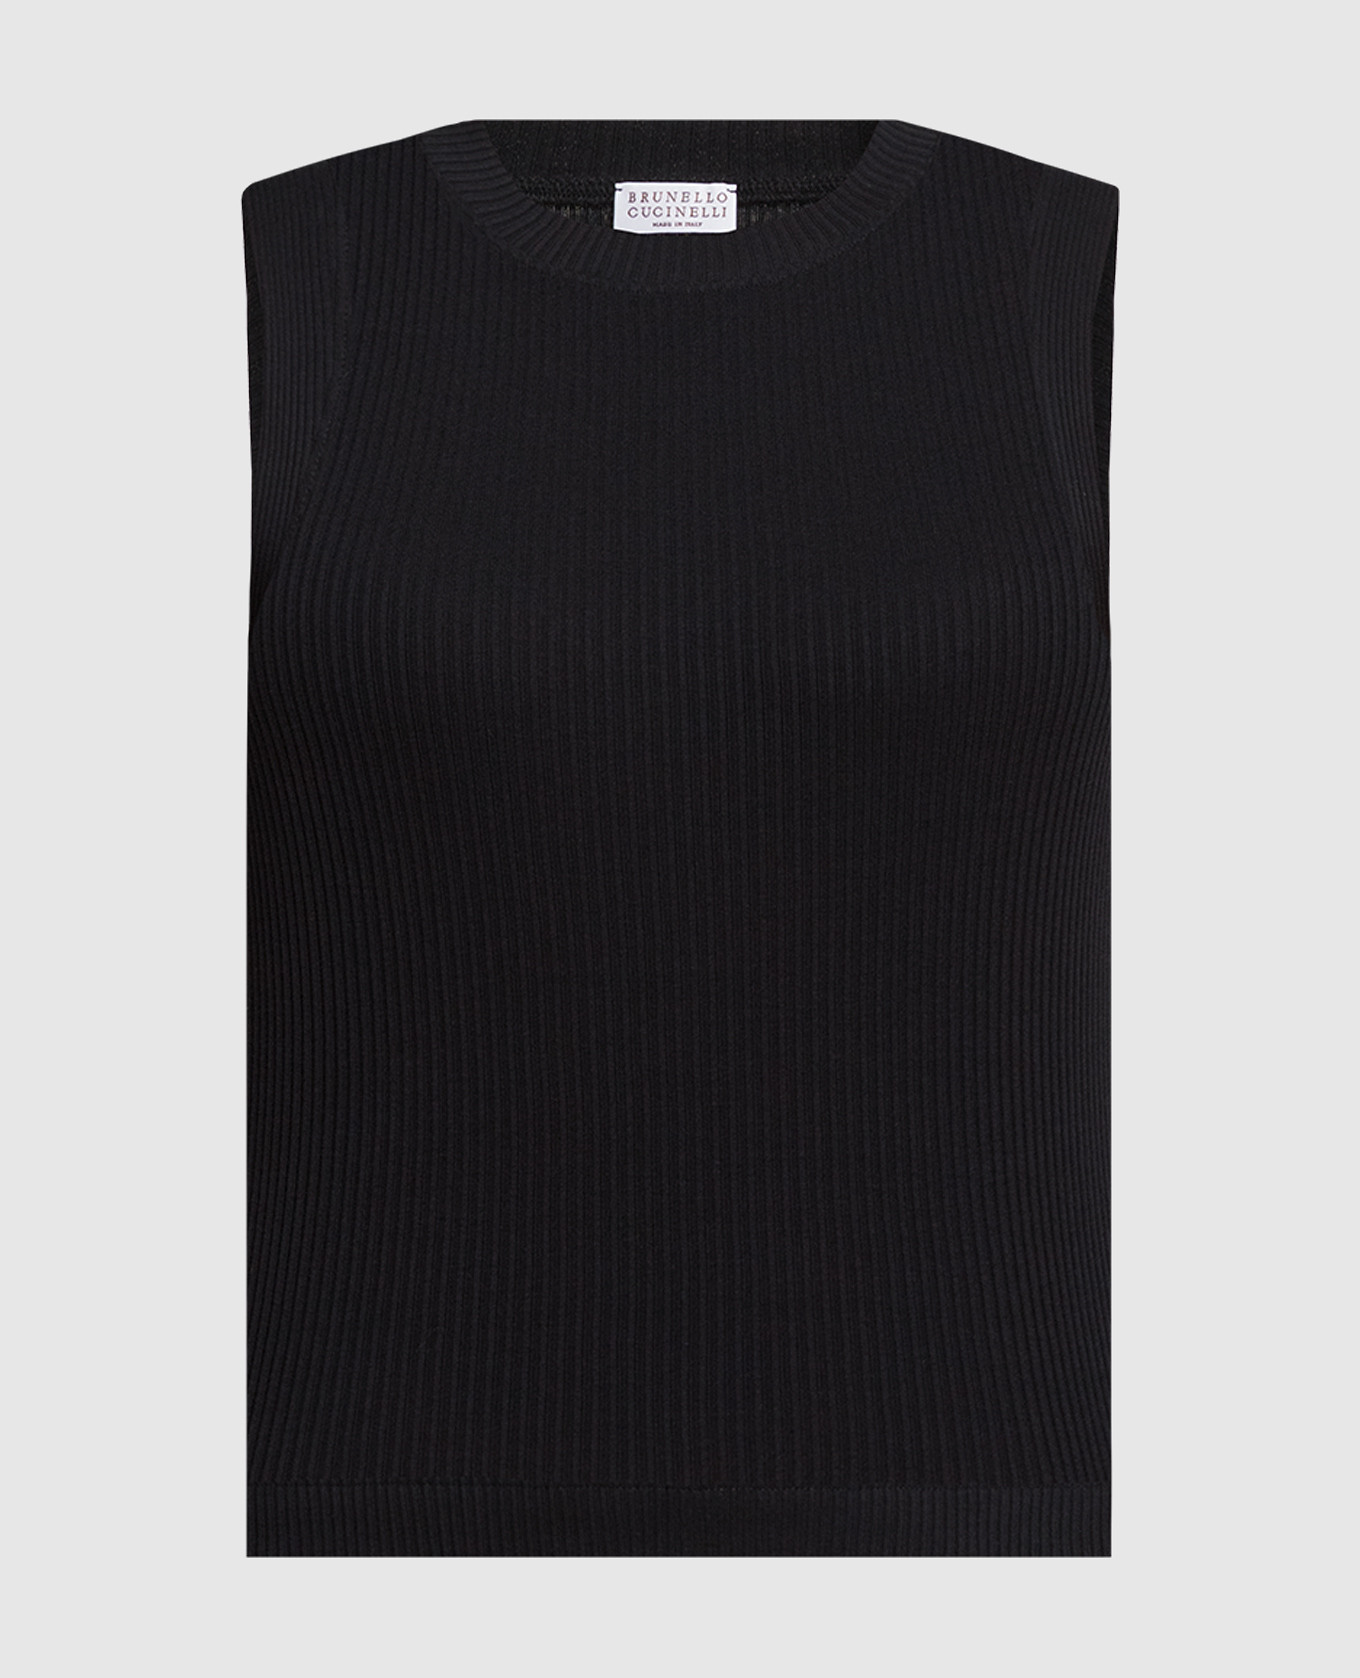 Black ribbed top with monil chain